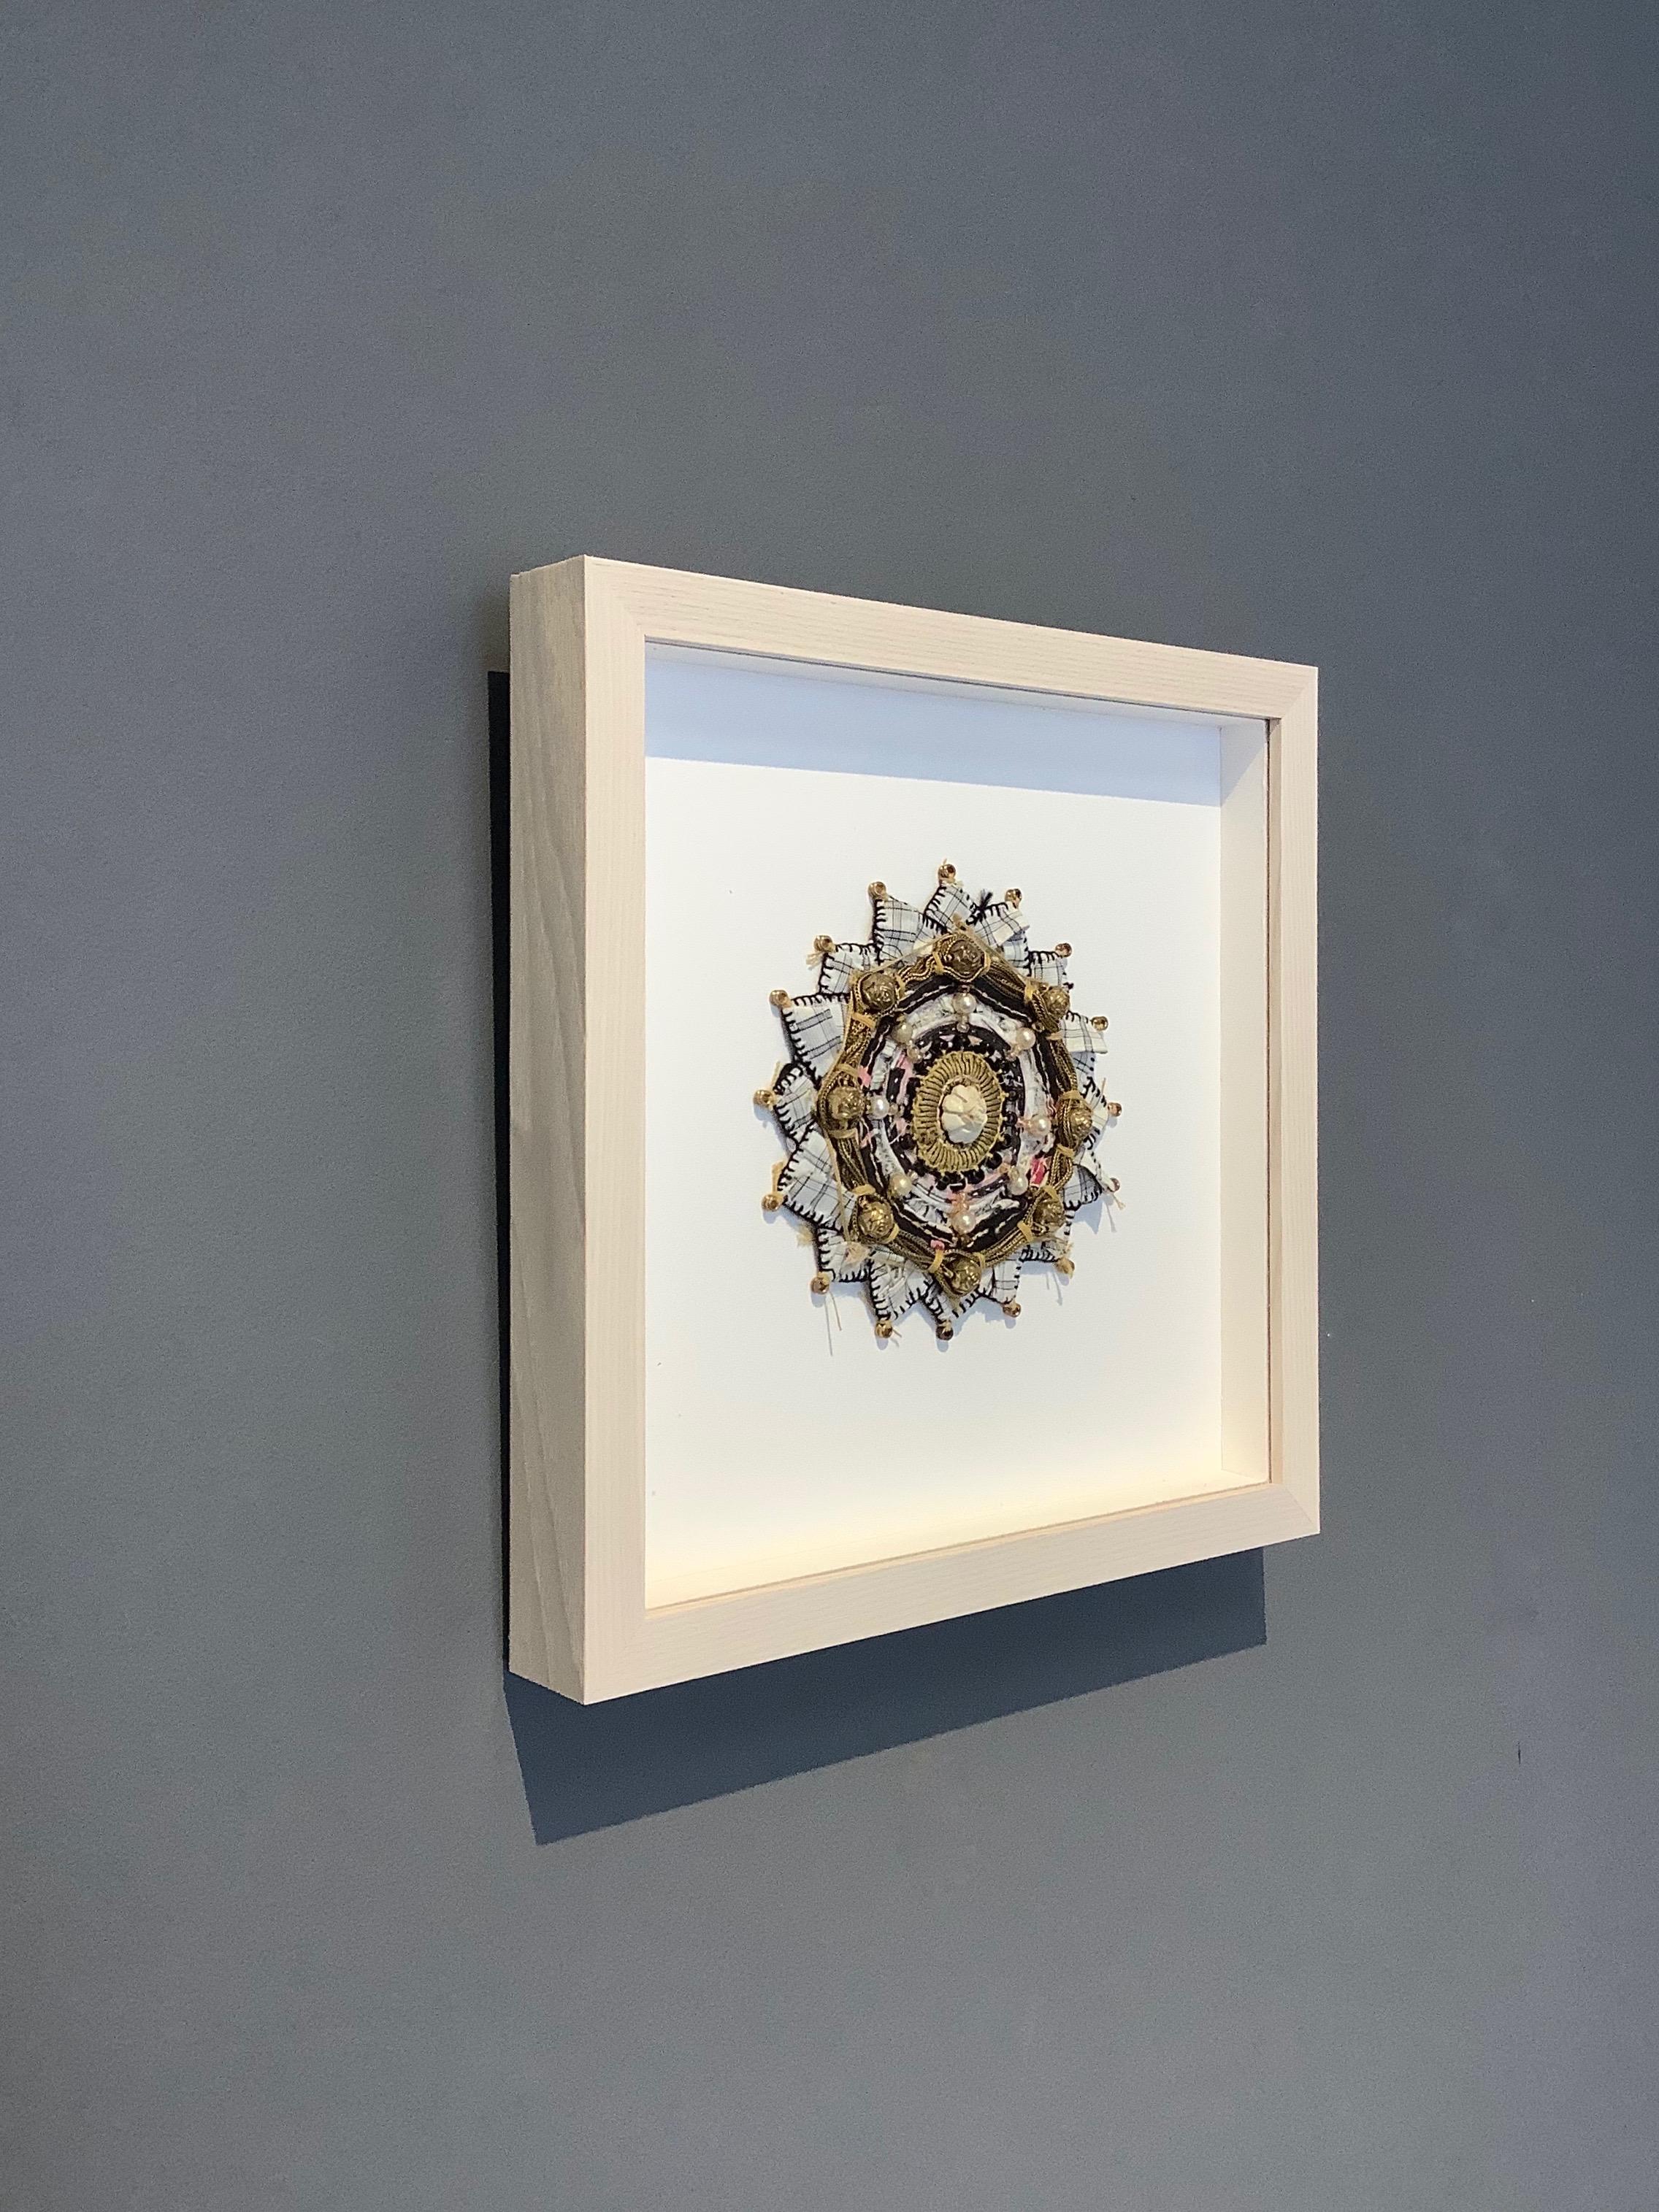 Mixed media mandala by Donna Sharrett containing guitar string ball-ends, clothing, needlework, jewelry, and thread. A carved ivory rose bead at the center is outlined with gold threading and a circle of pearls, is surrounded by carved gold rose